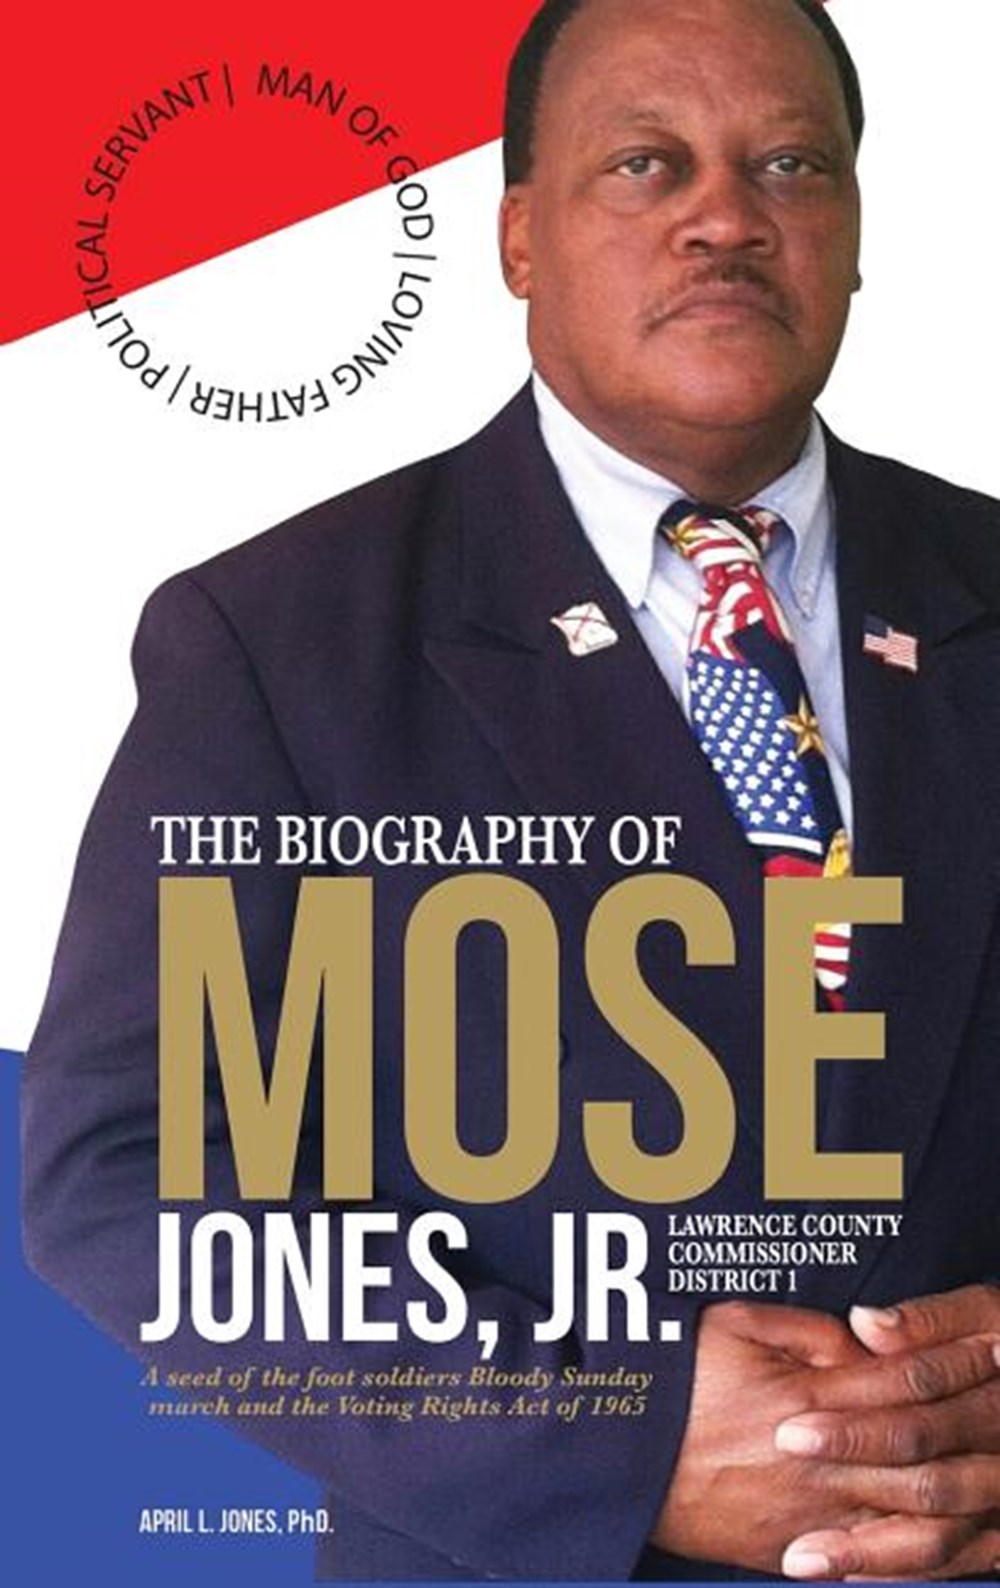 Biography of Mose Jones Jr., Lawrence County Commissioner of District 1: A seed of the foot soldiers